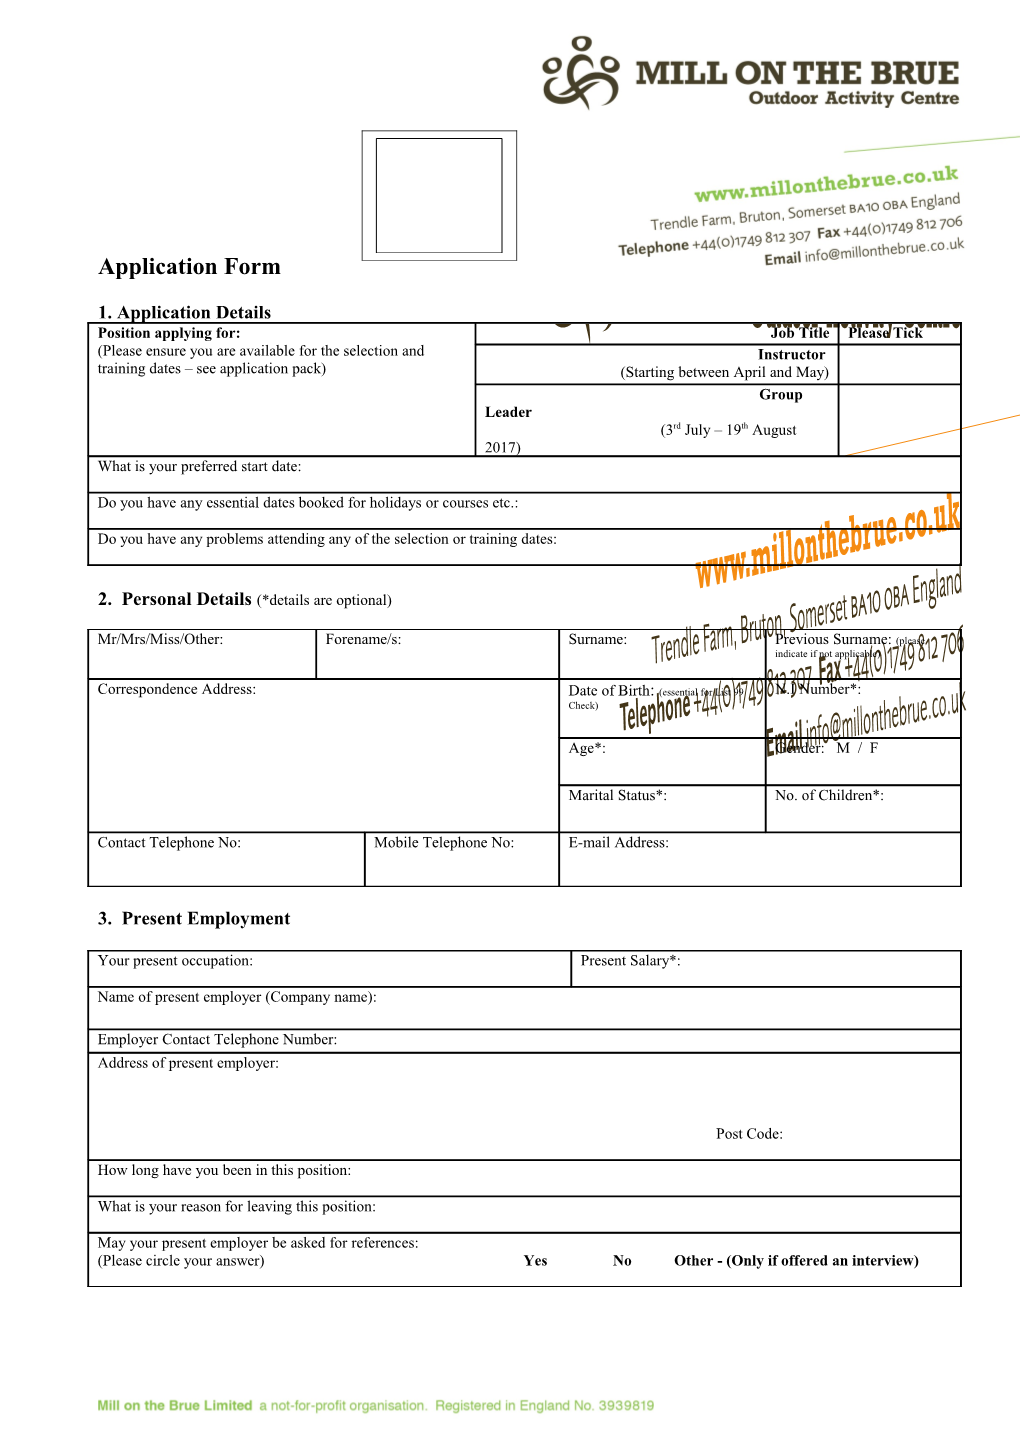 Application Form s65